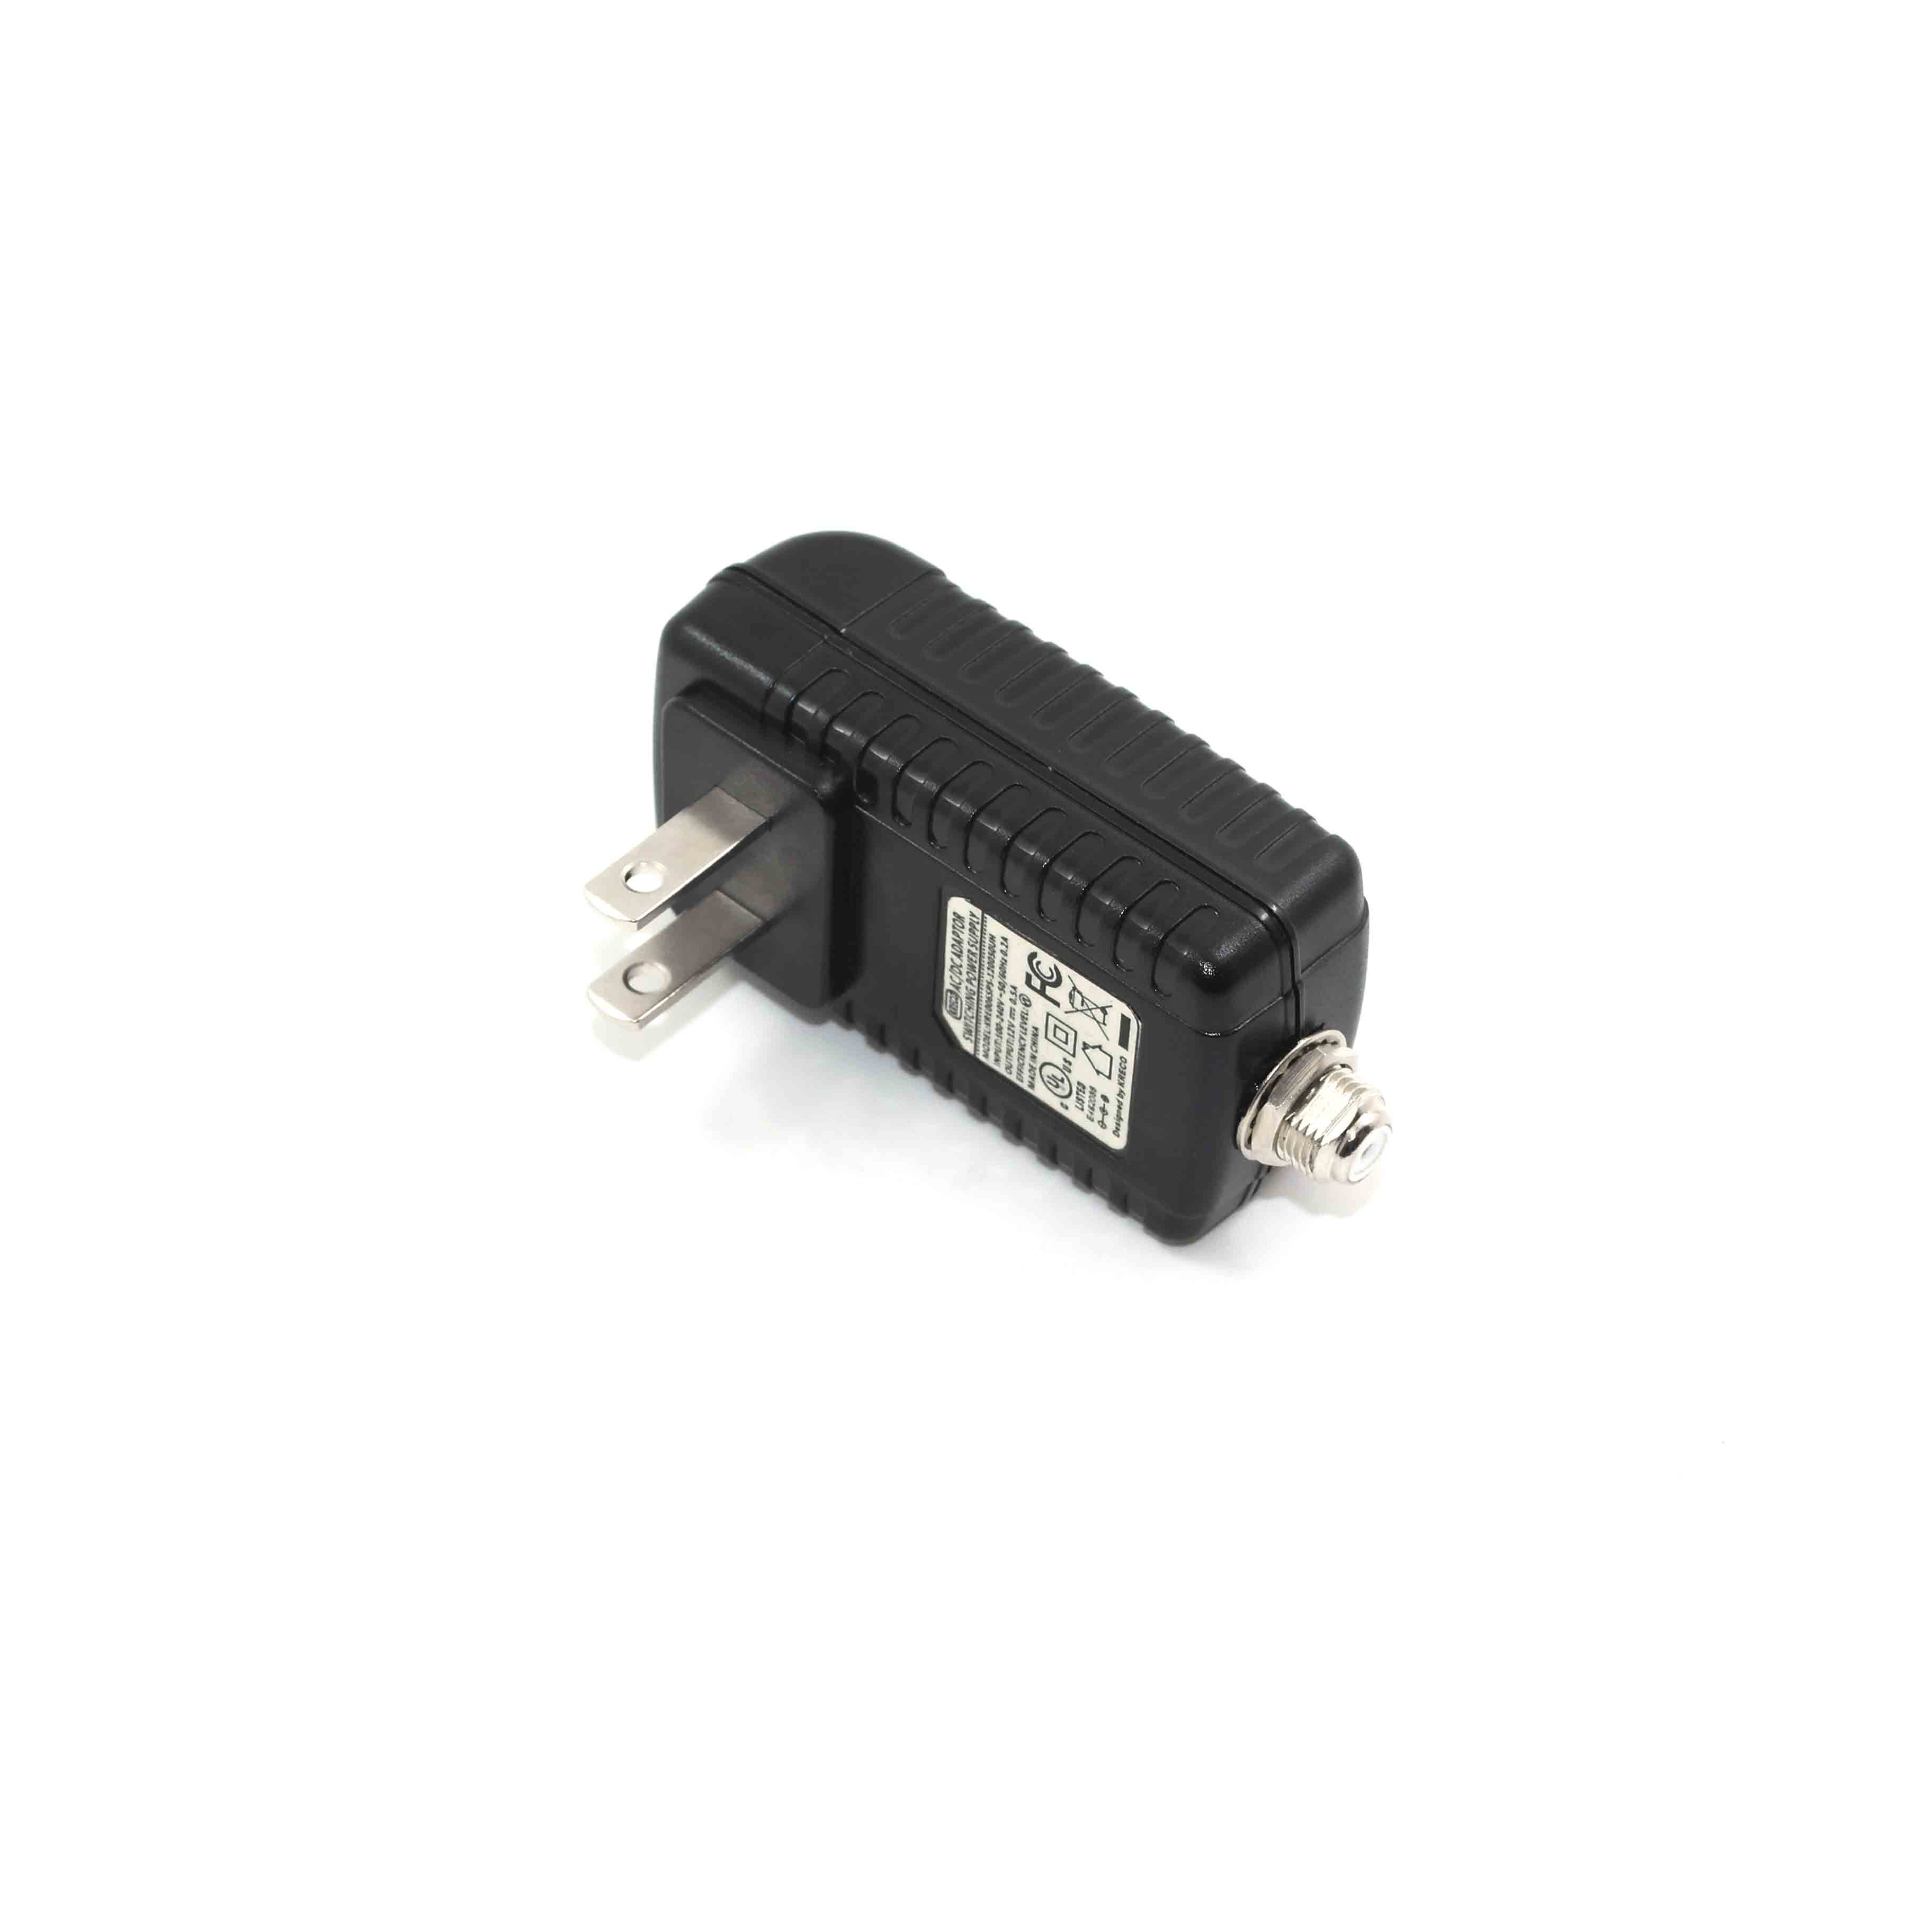 switching mode power adapter, high voltage power s